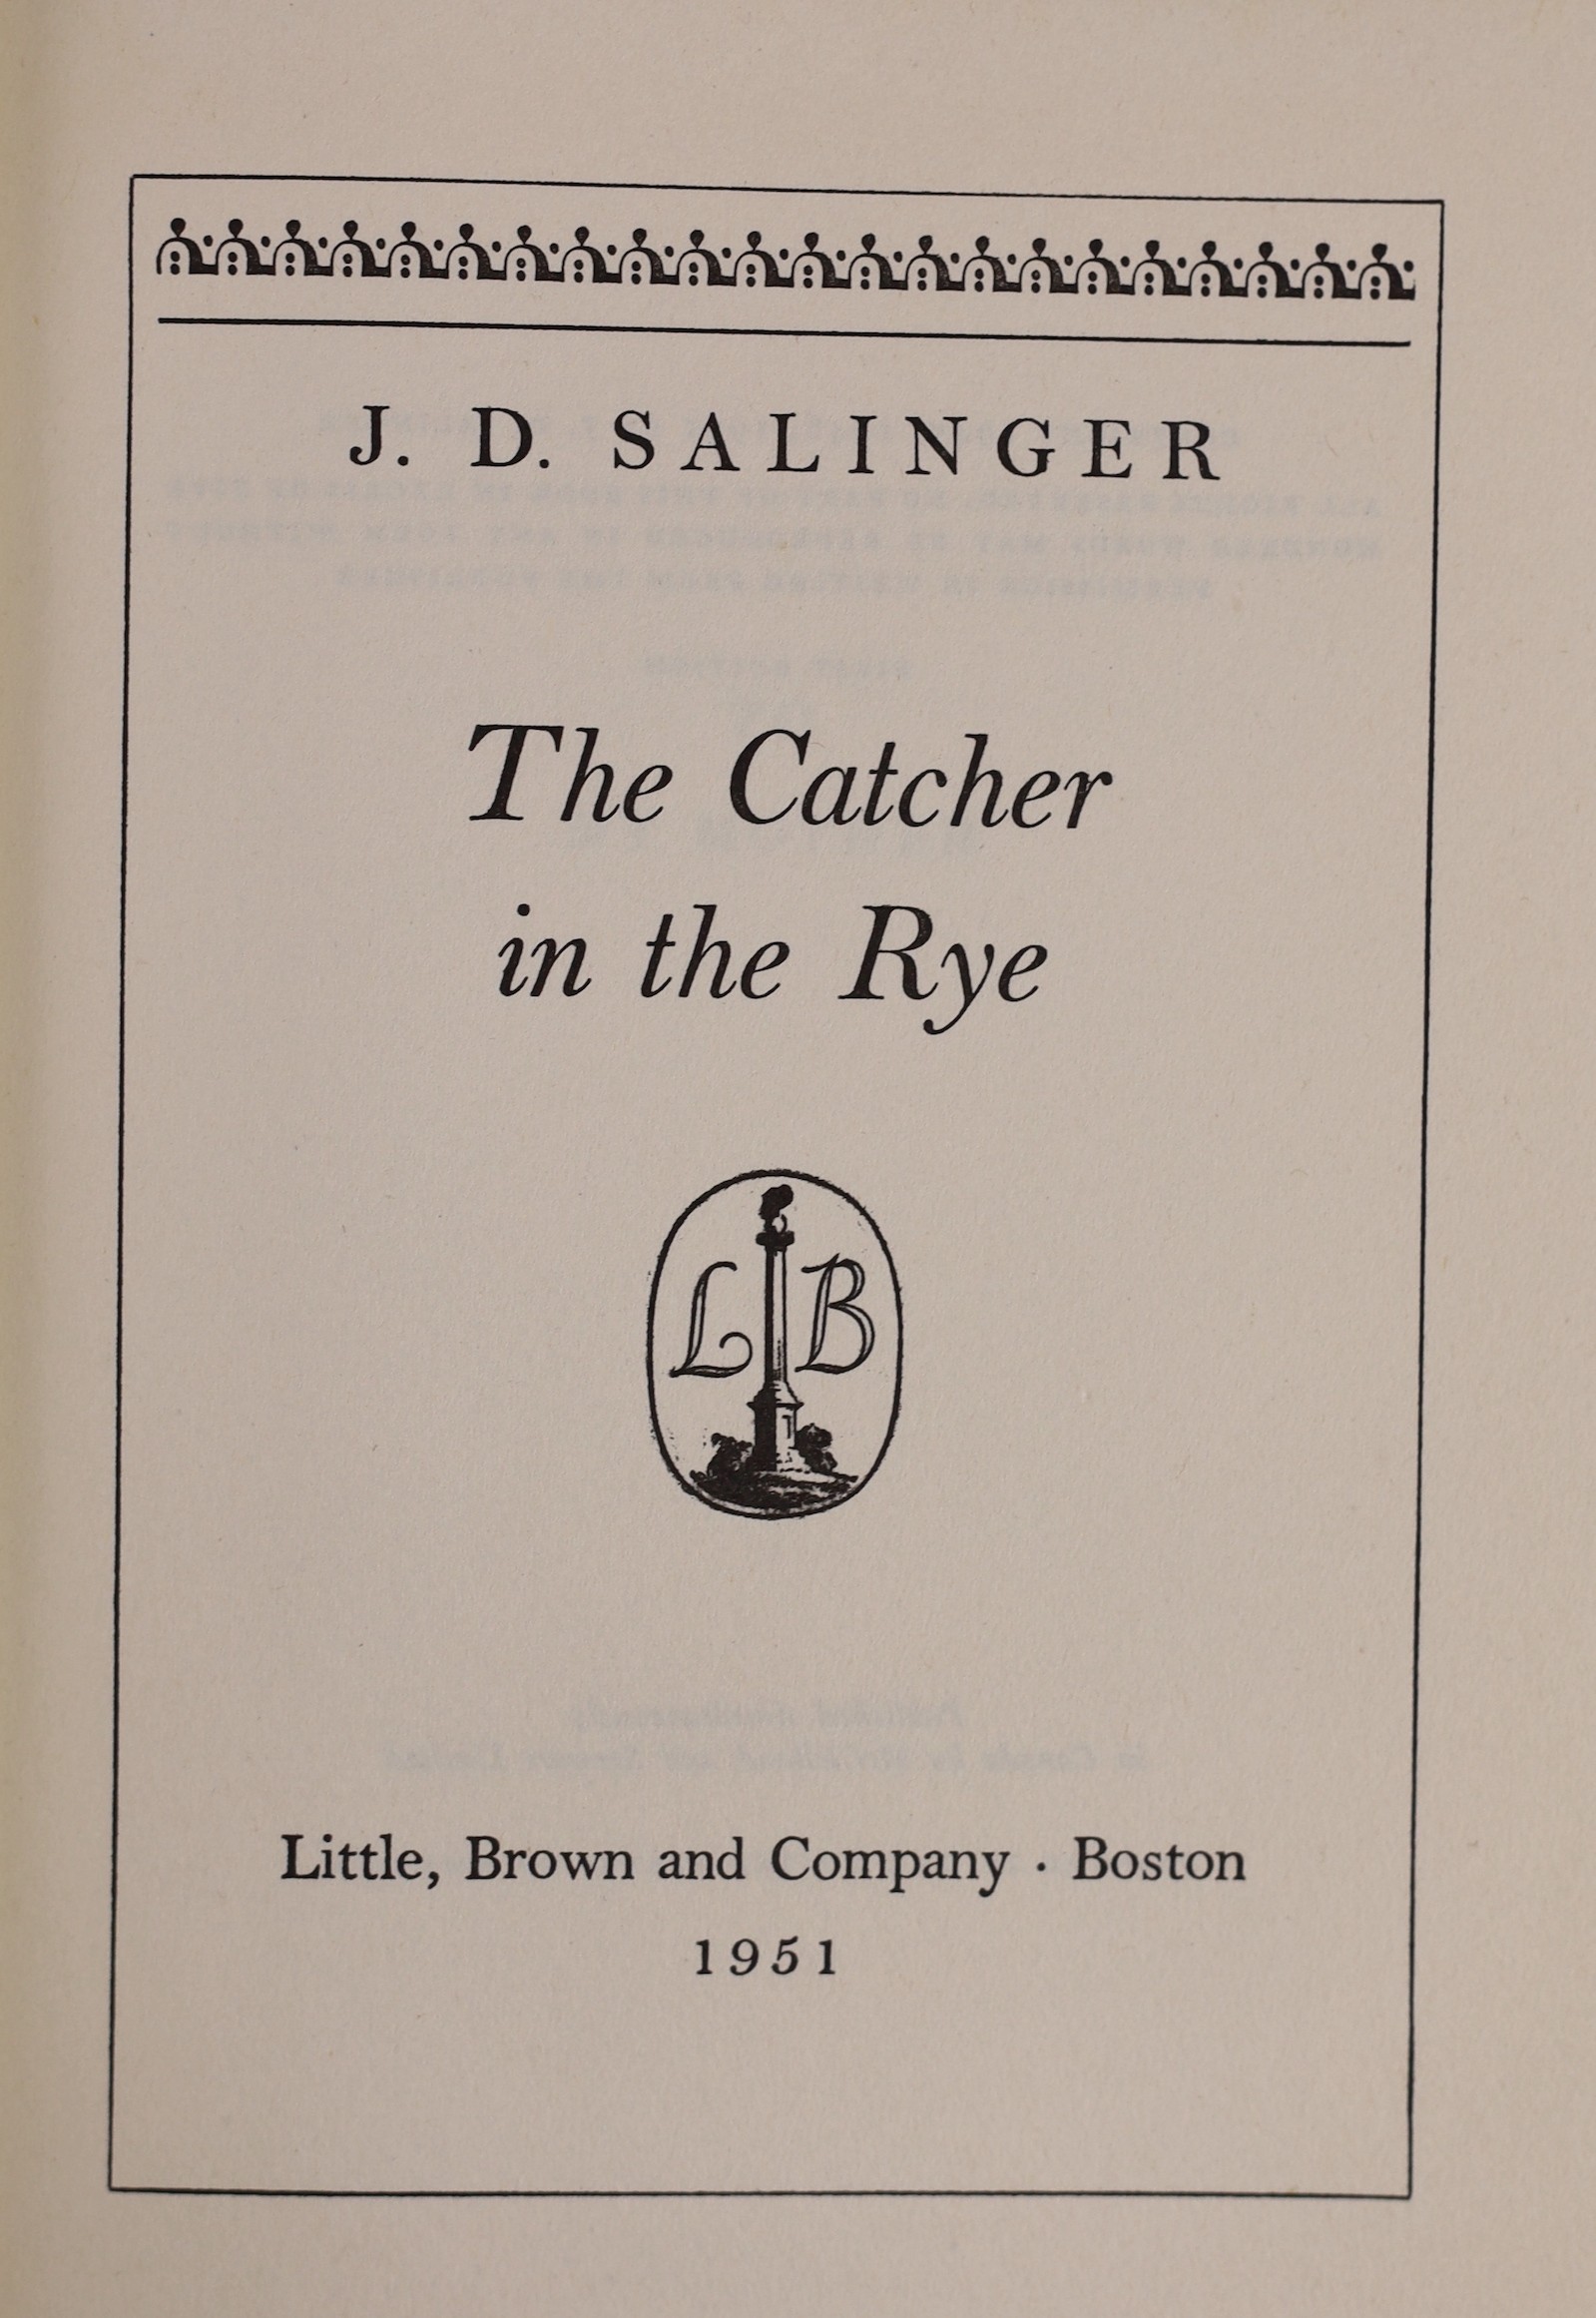 Salinger, Jerome David - The Catcher in the Rye, 1st edition, 8vo, original gilt-stamped black cloth, in 1st issue unclipped d/j printed in red, black and yellow, with photo portrait of the author by Lotte Jacobi on rear